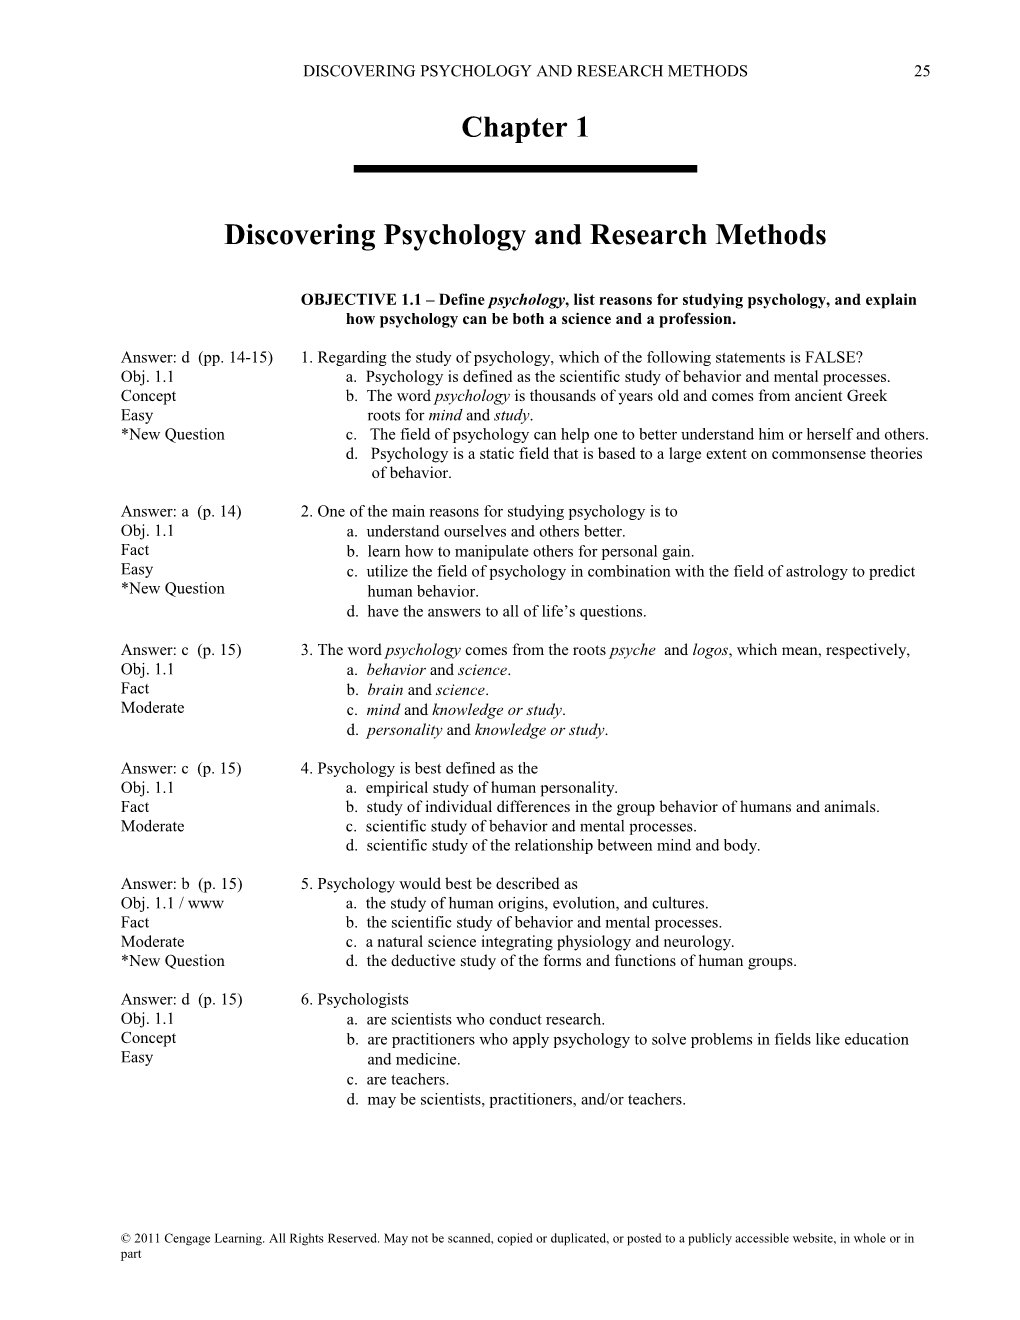 Discovering Psychology and Research Methods